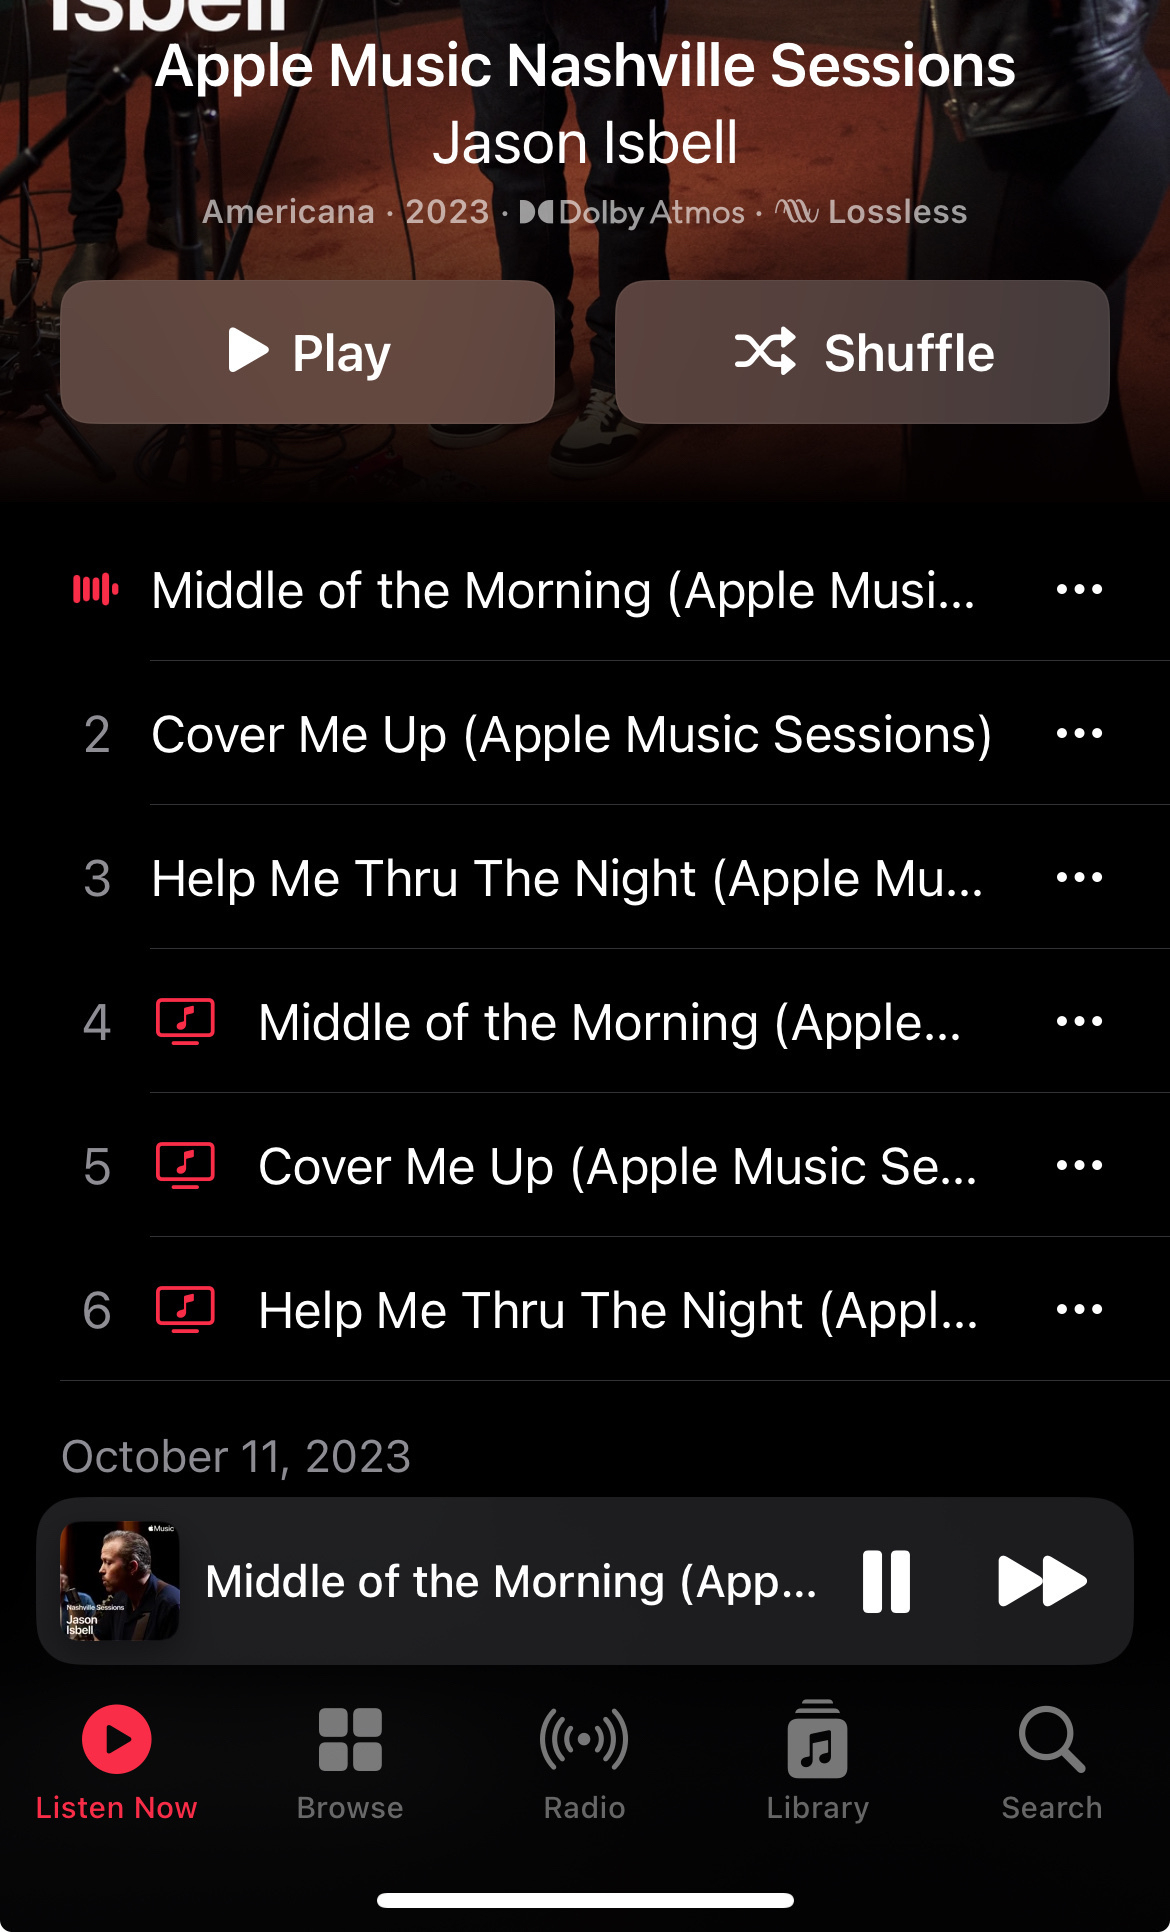 Apple Music screenshot of a recent Jason Isobel album with 3 songs and 3 videos. 